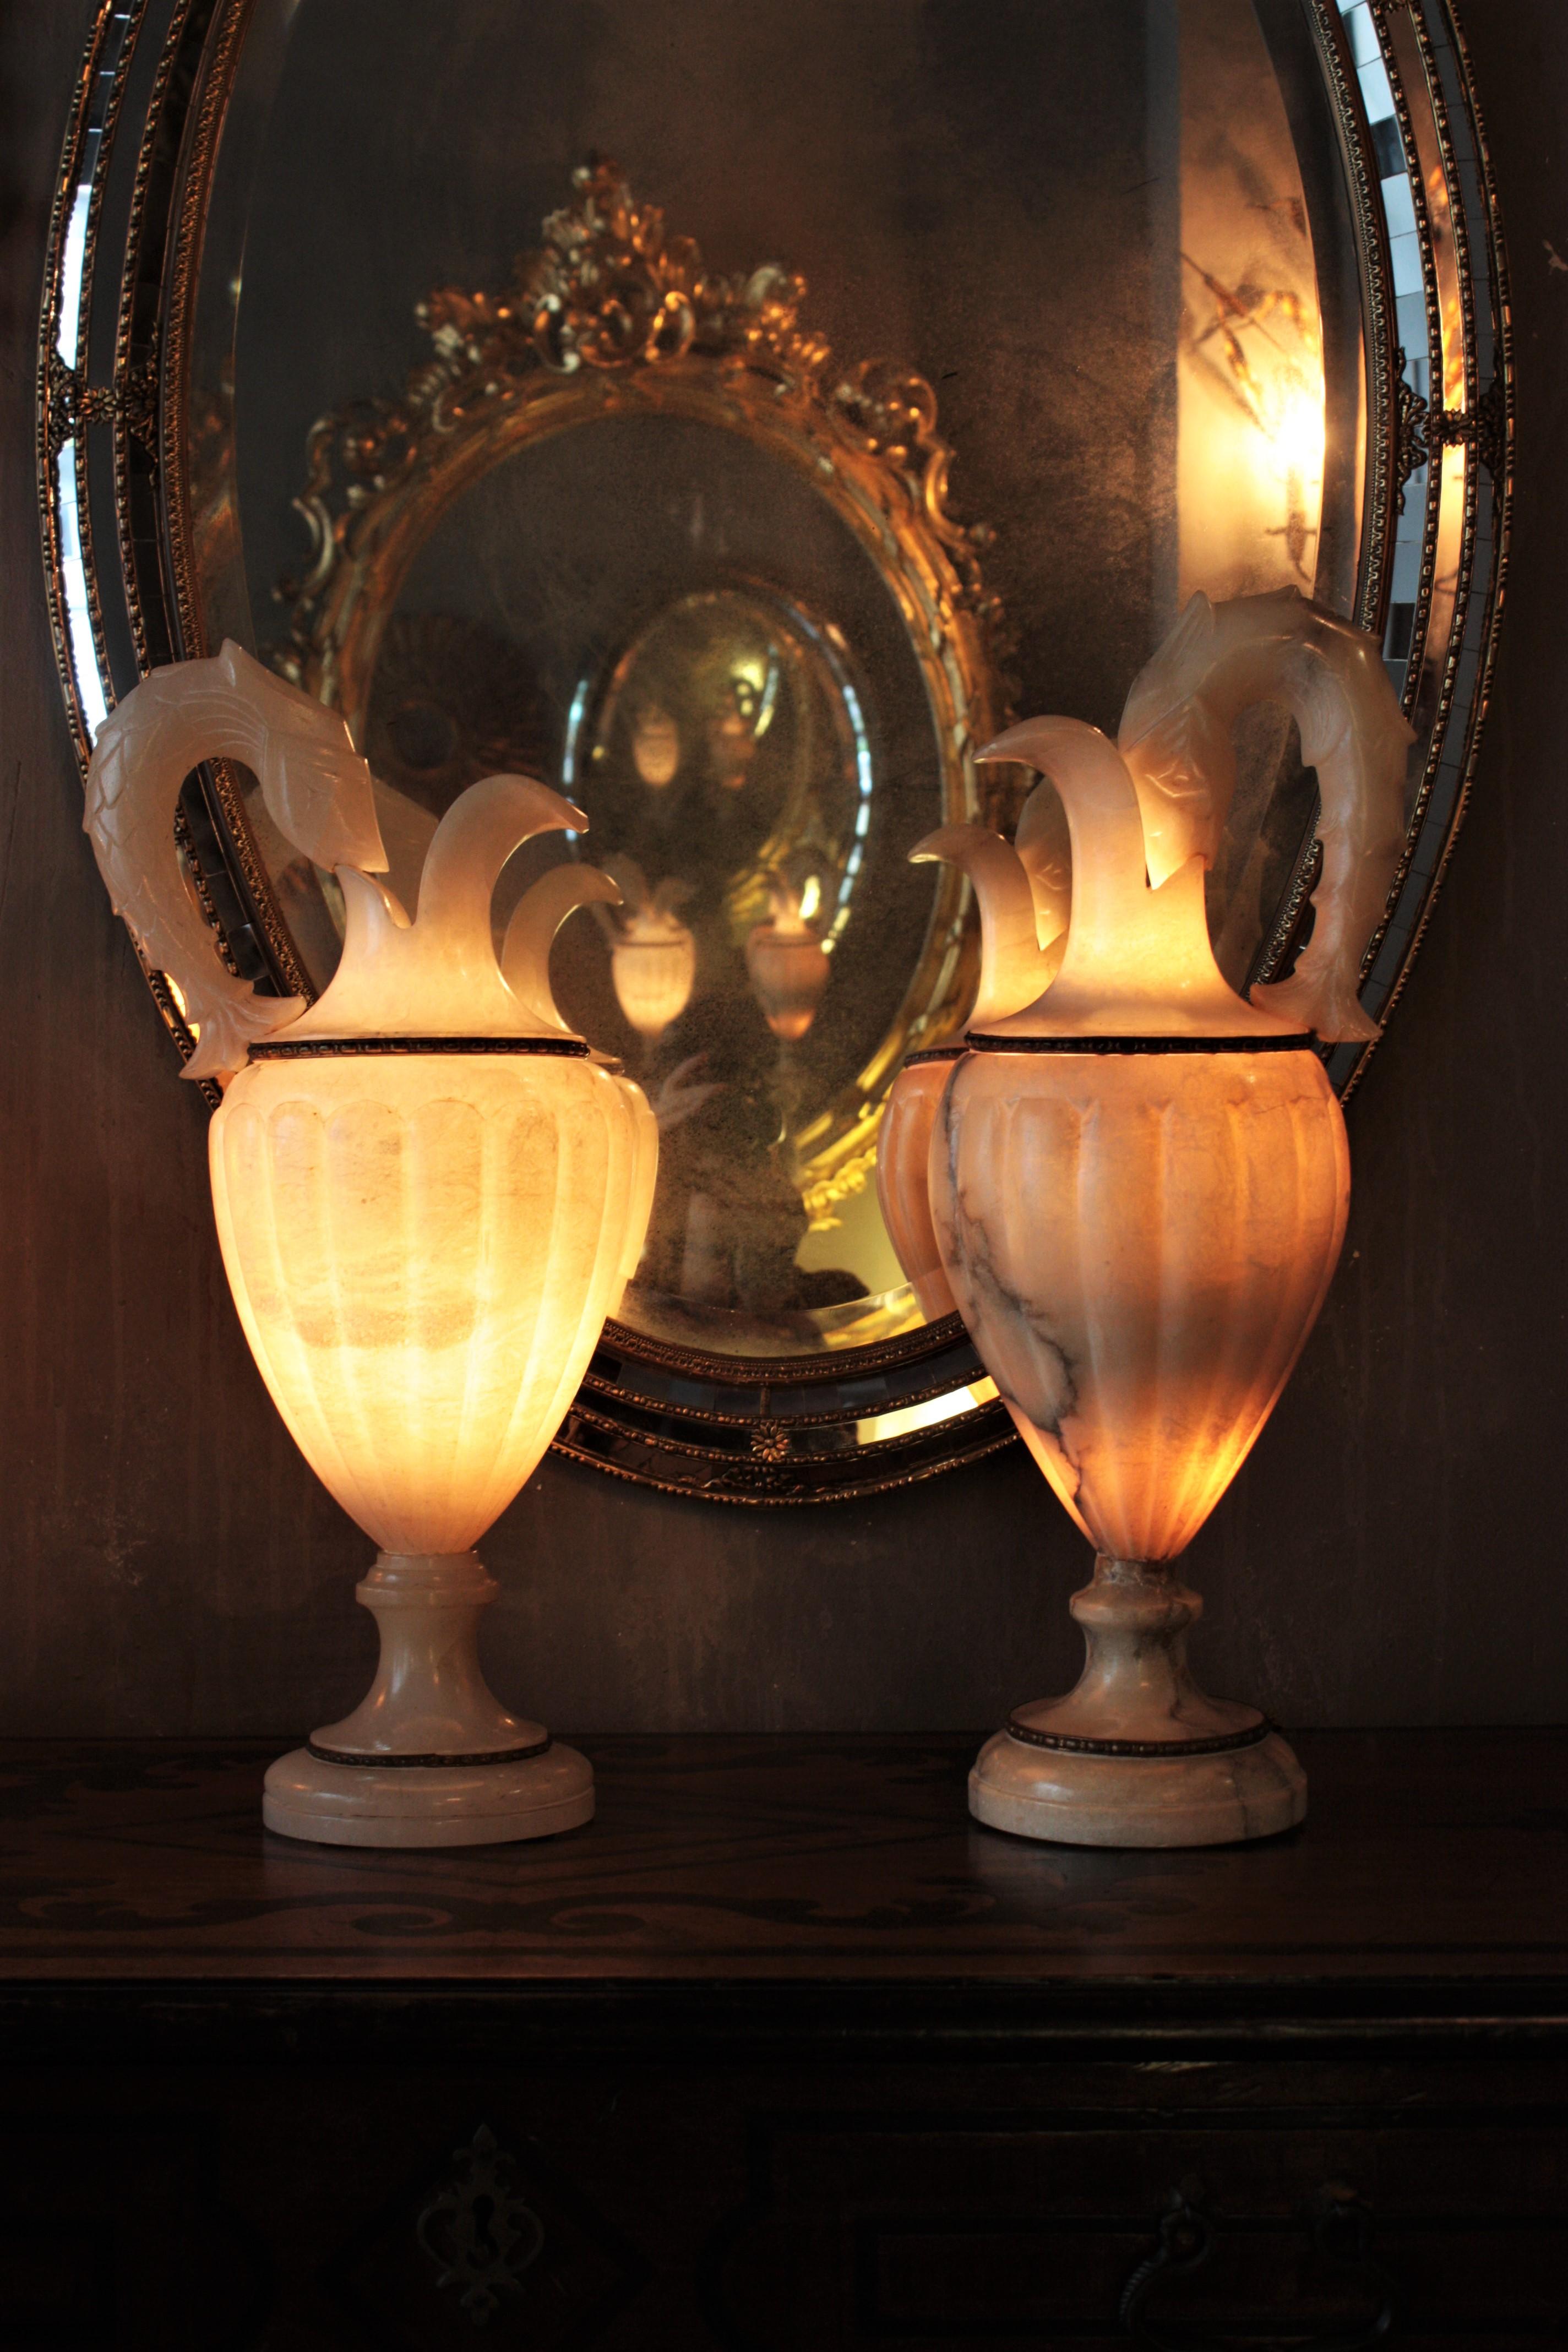 20th Century Pair of Albaster Urn Jar Table Lamps, Spain, 1940s For Sale